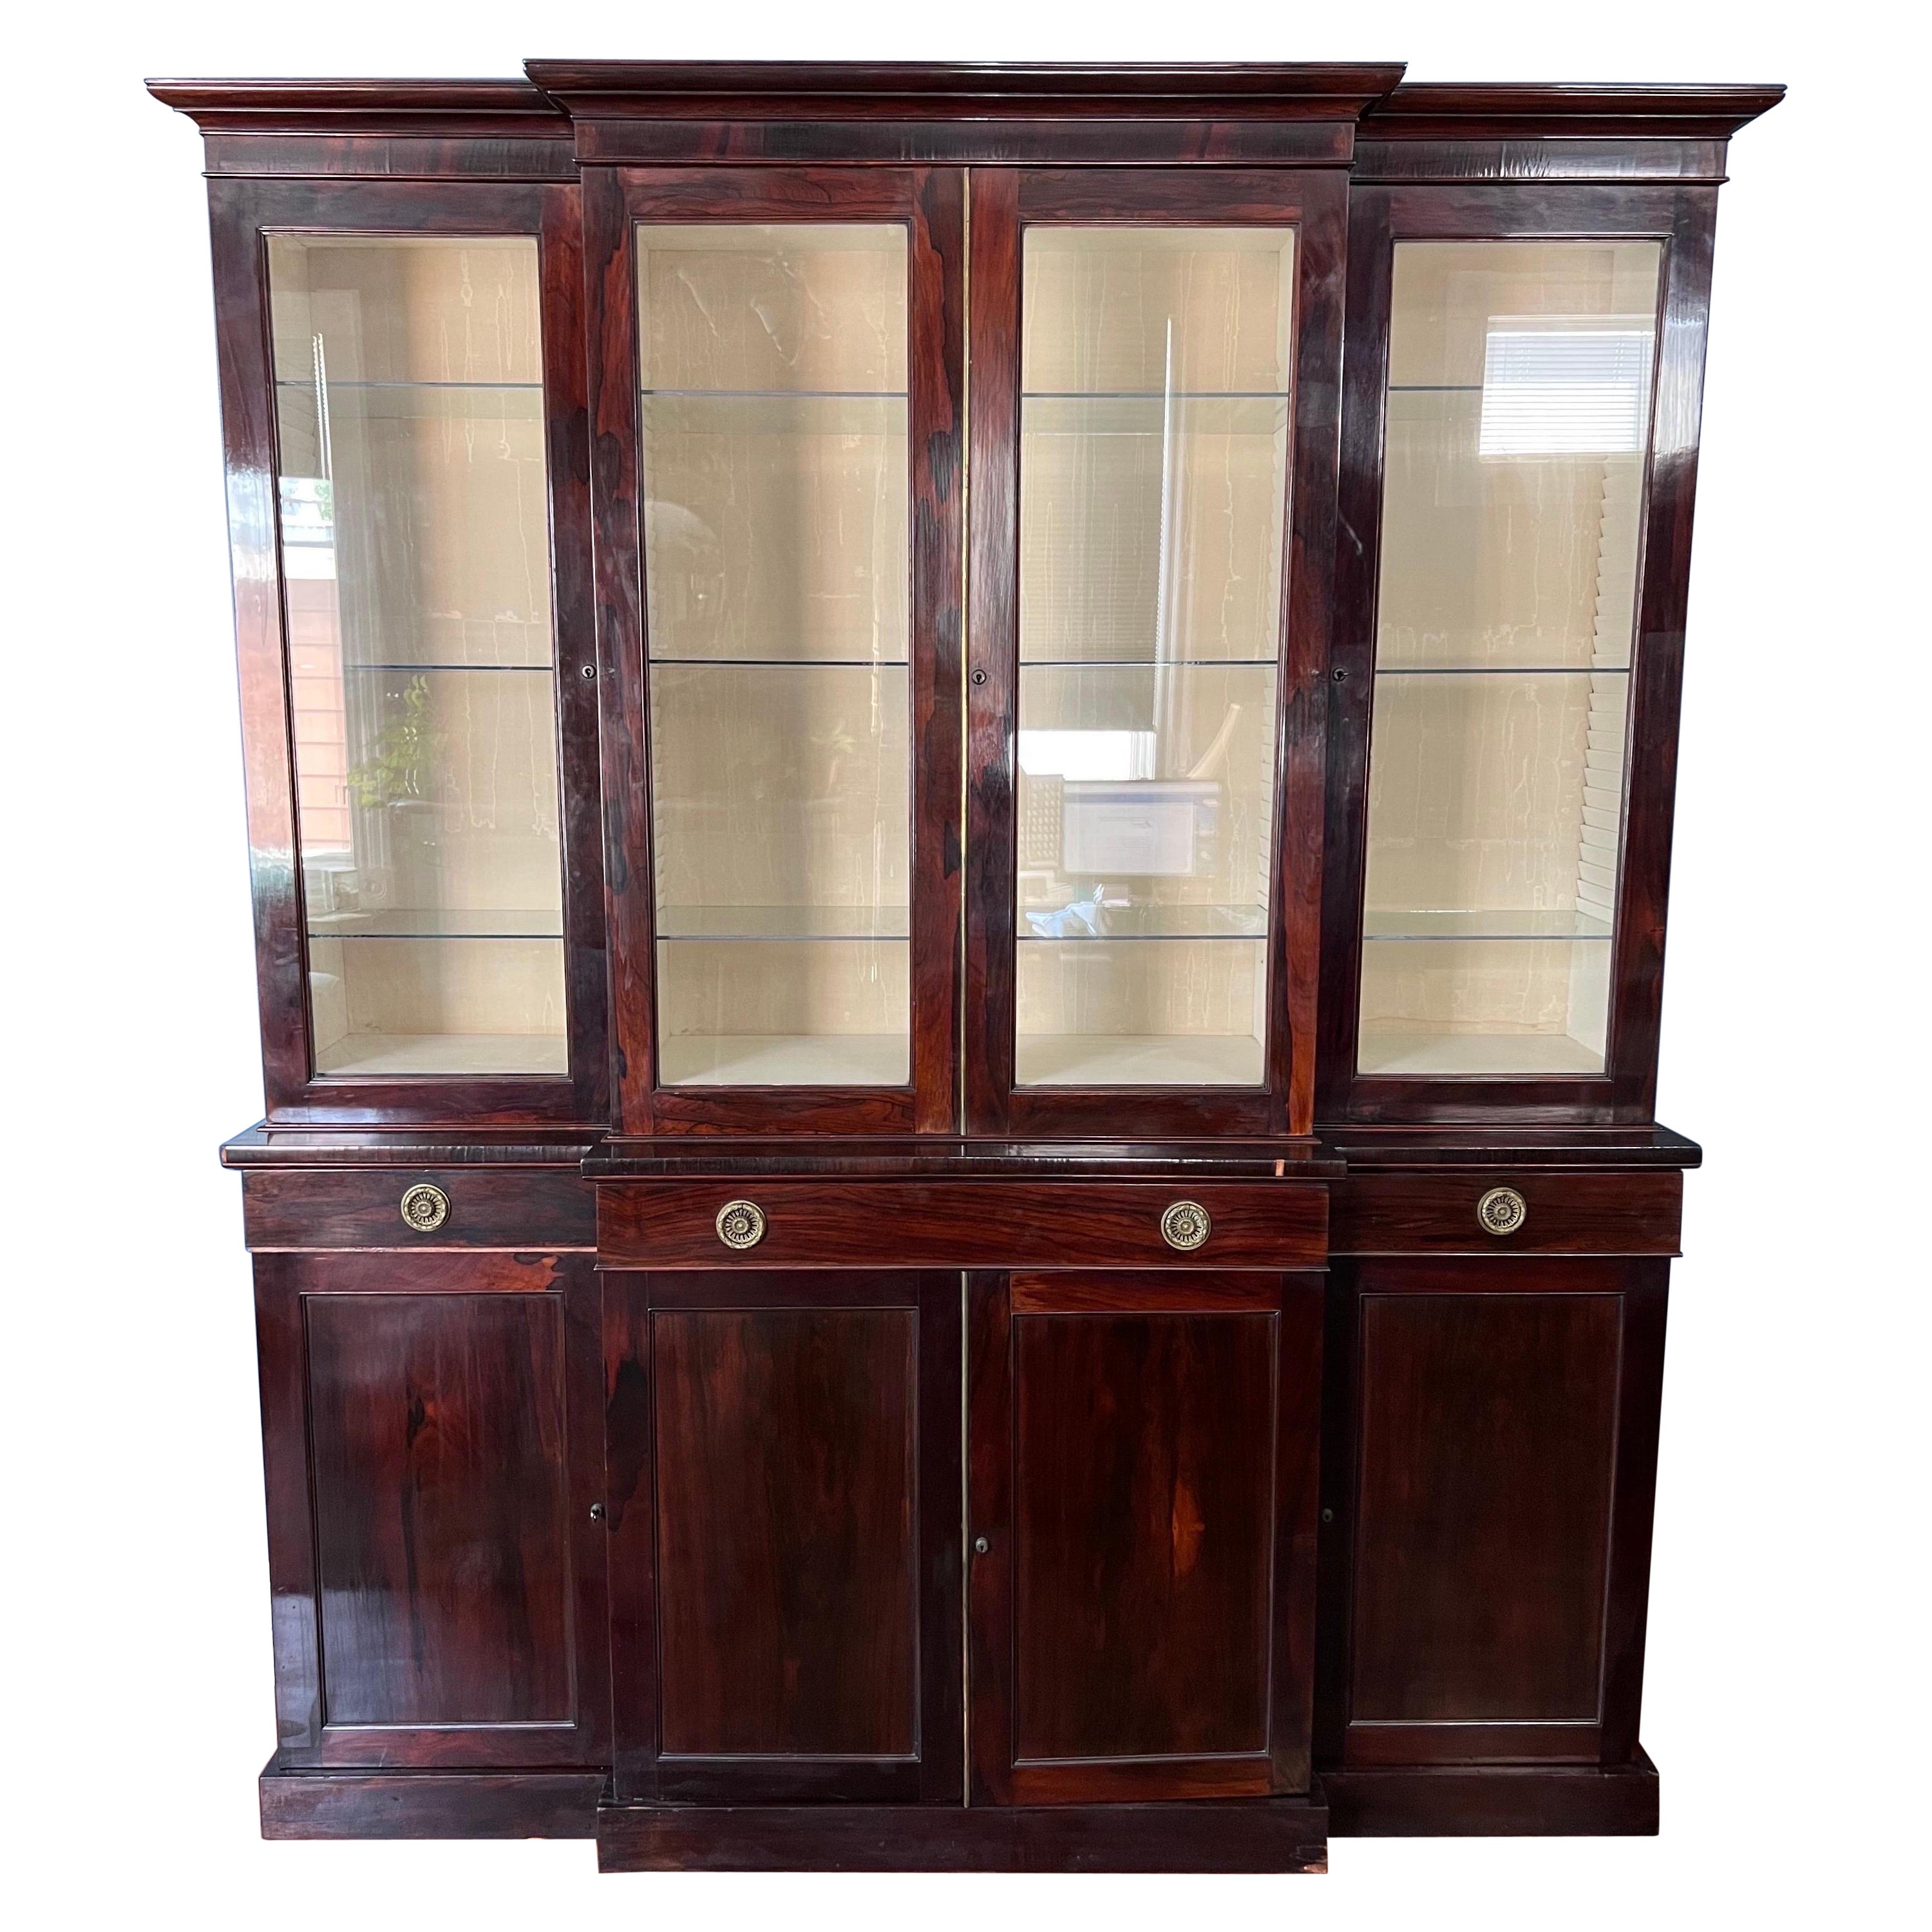 19th Century English Rosewood Breakfront Bookcase with Hidden Drawers For Sale